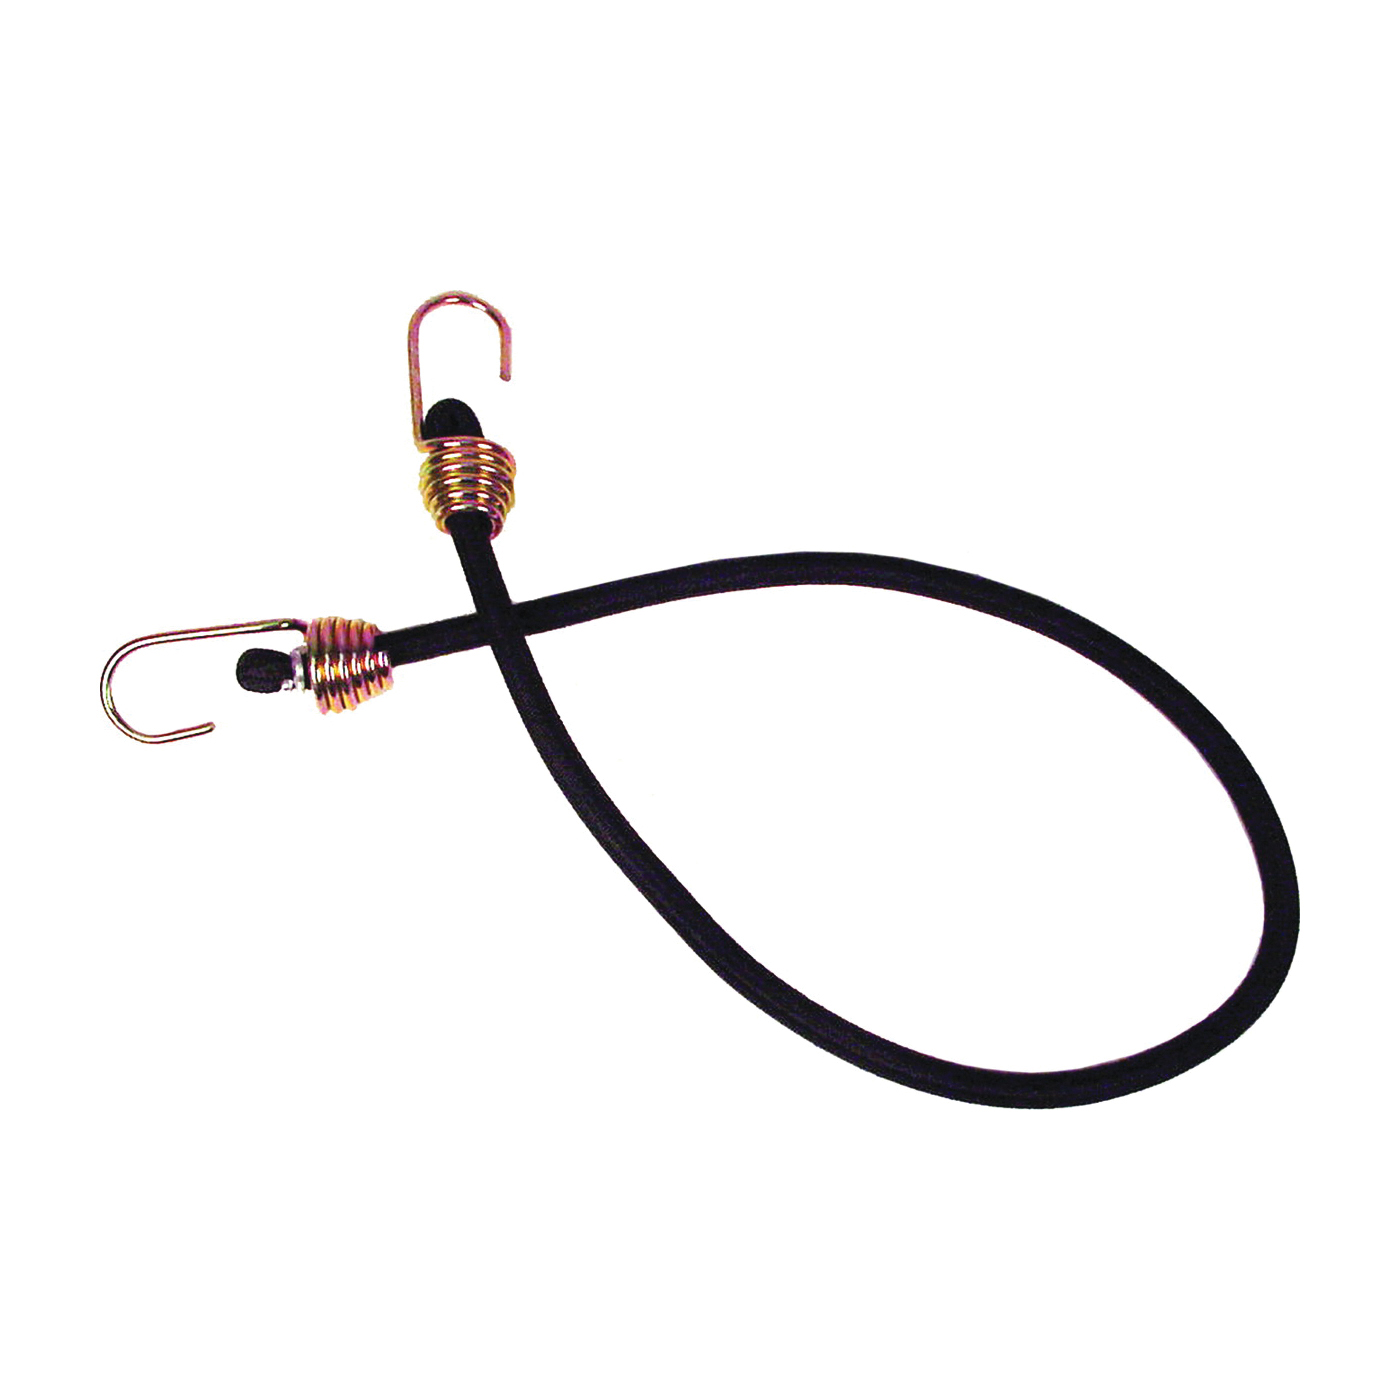 06182 Bungee Cord, 13/32 in Dia, 32 in L, Rubber, Black, Hook End